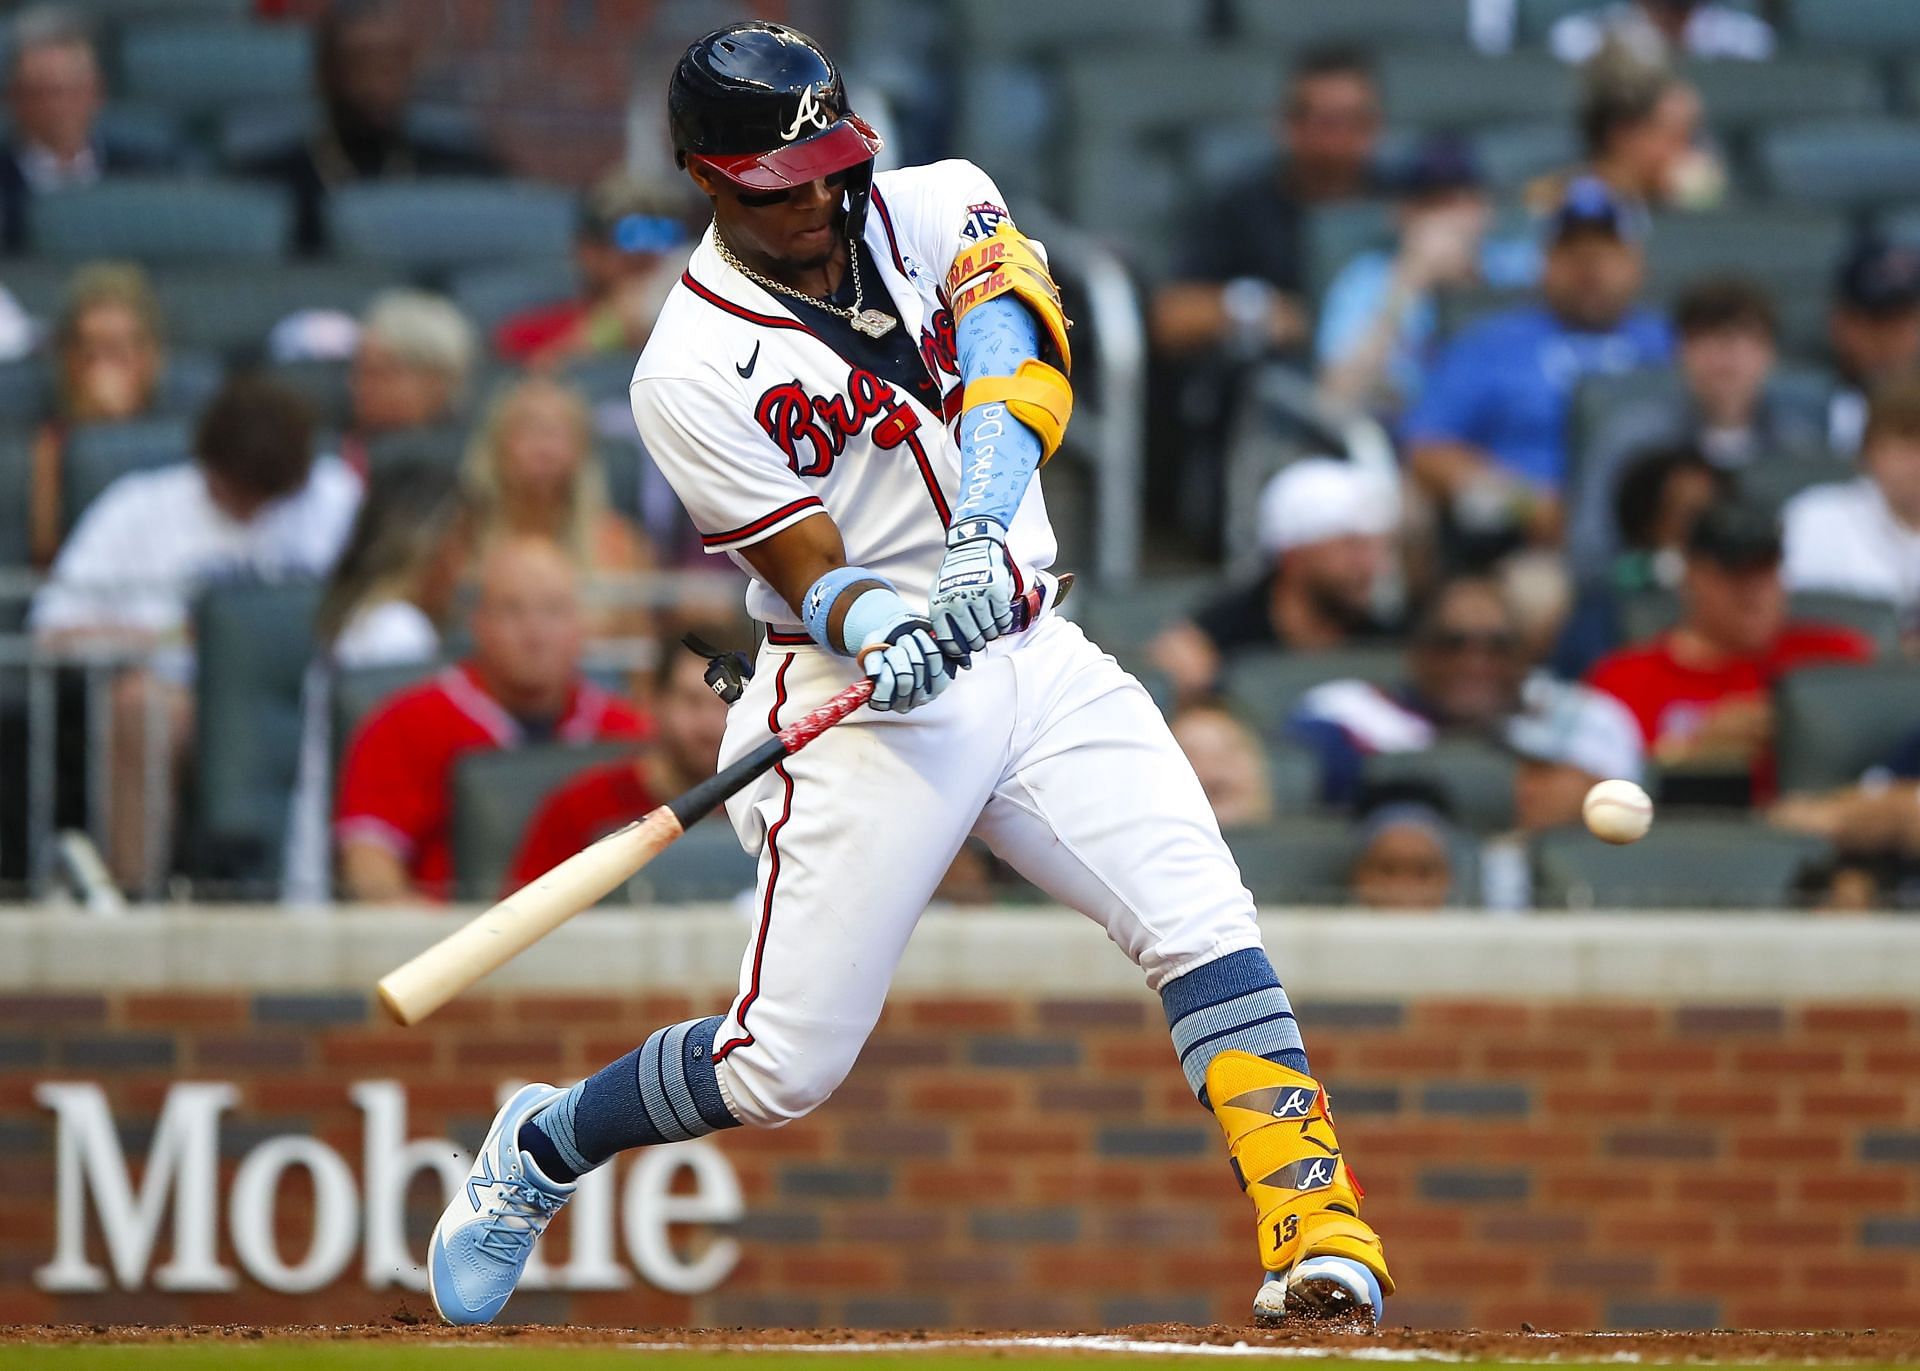 Braves stopping game for Ronald Acuña Jr.'s historic moment